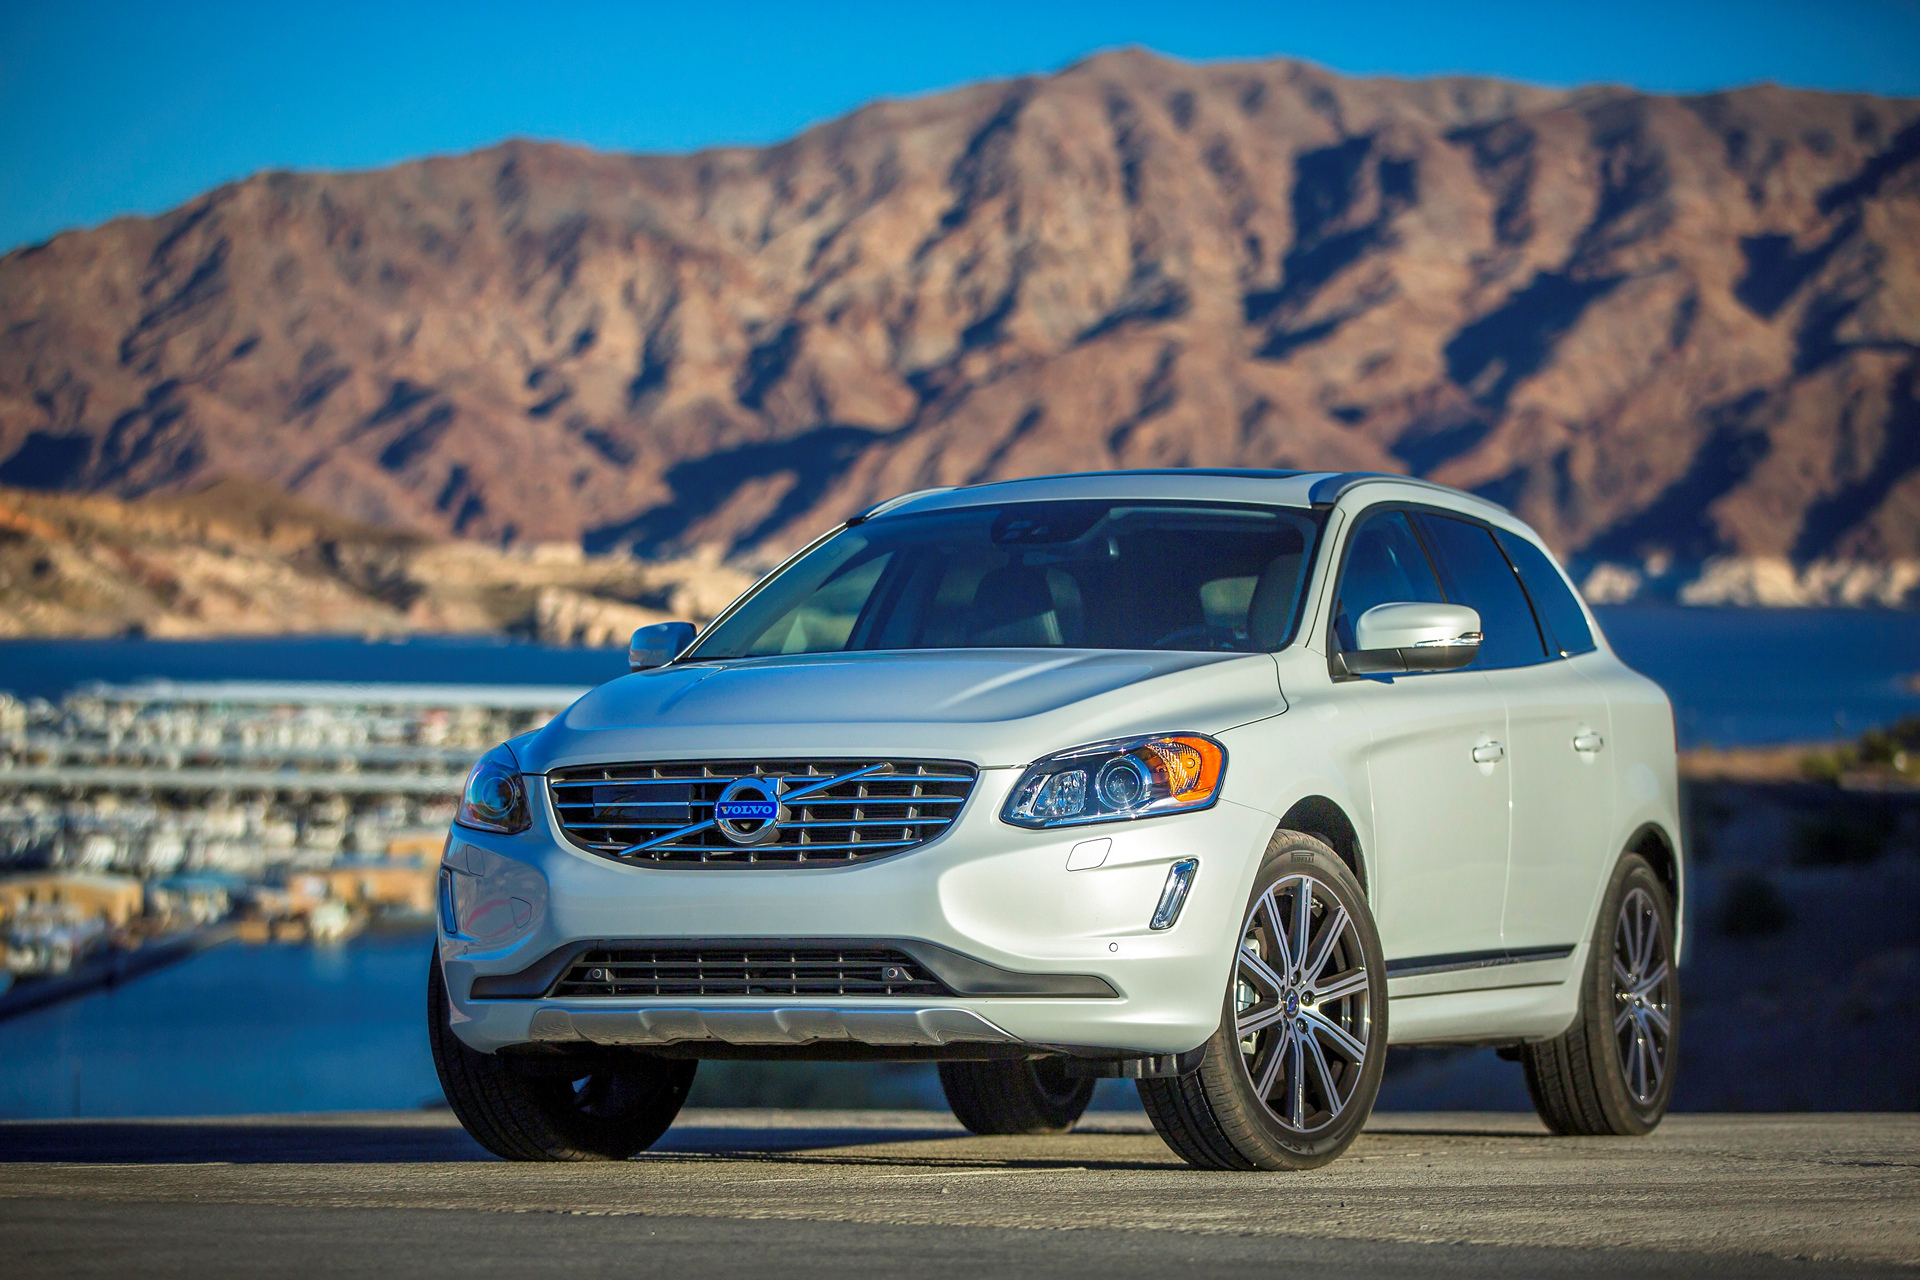 2016 Volvo XC60 © Zhejiang Geely Holding Group Co., Ltd